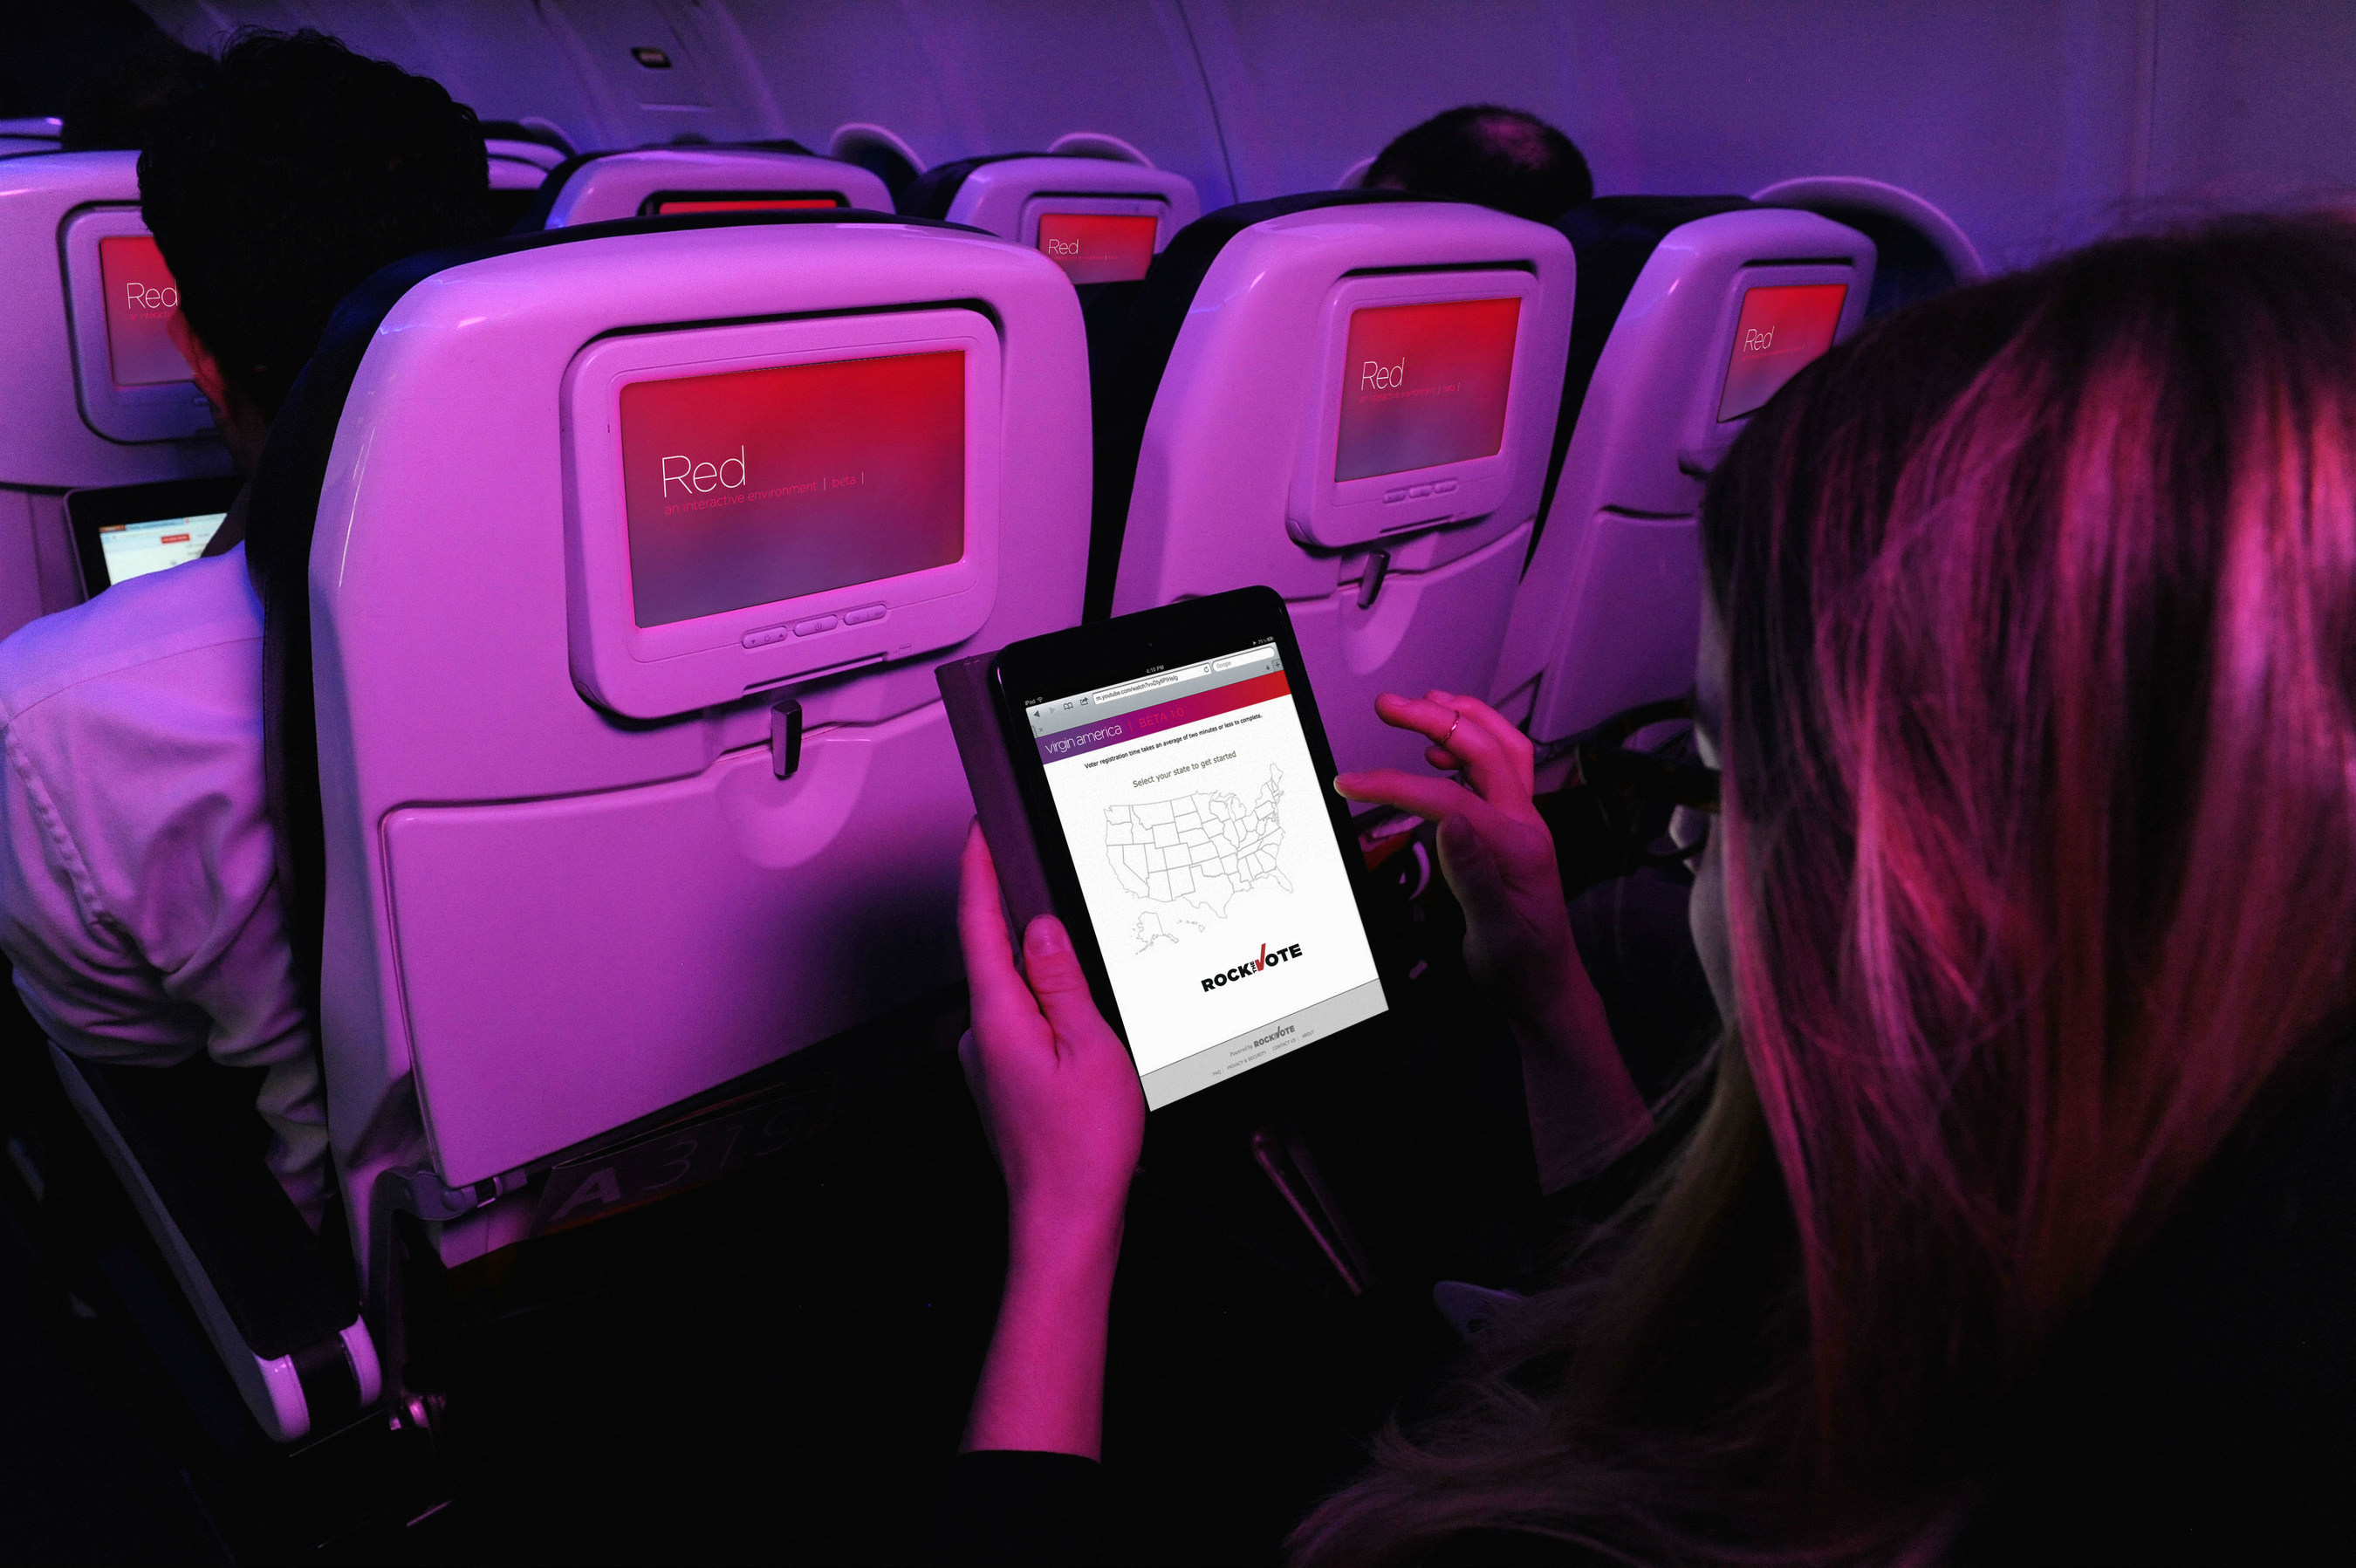 Virgin America is the official airline of Rock the Vote with flyers invited to register to vote at 35,000 feet